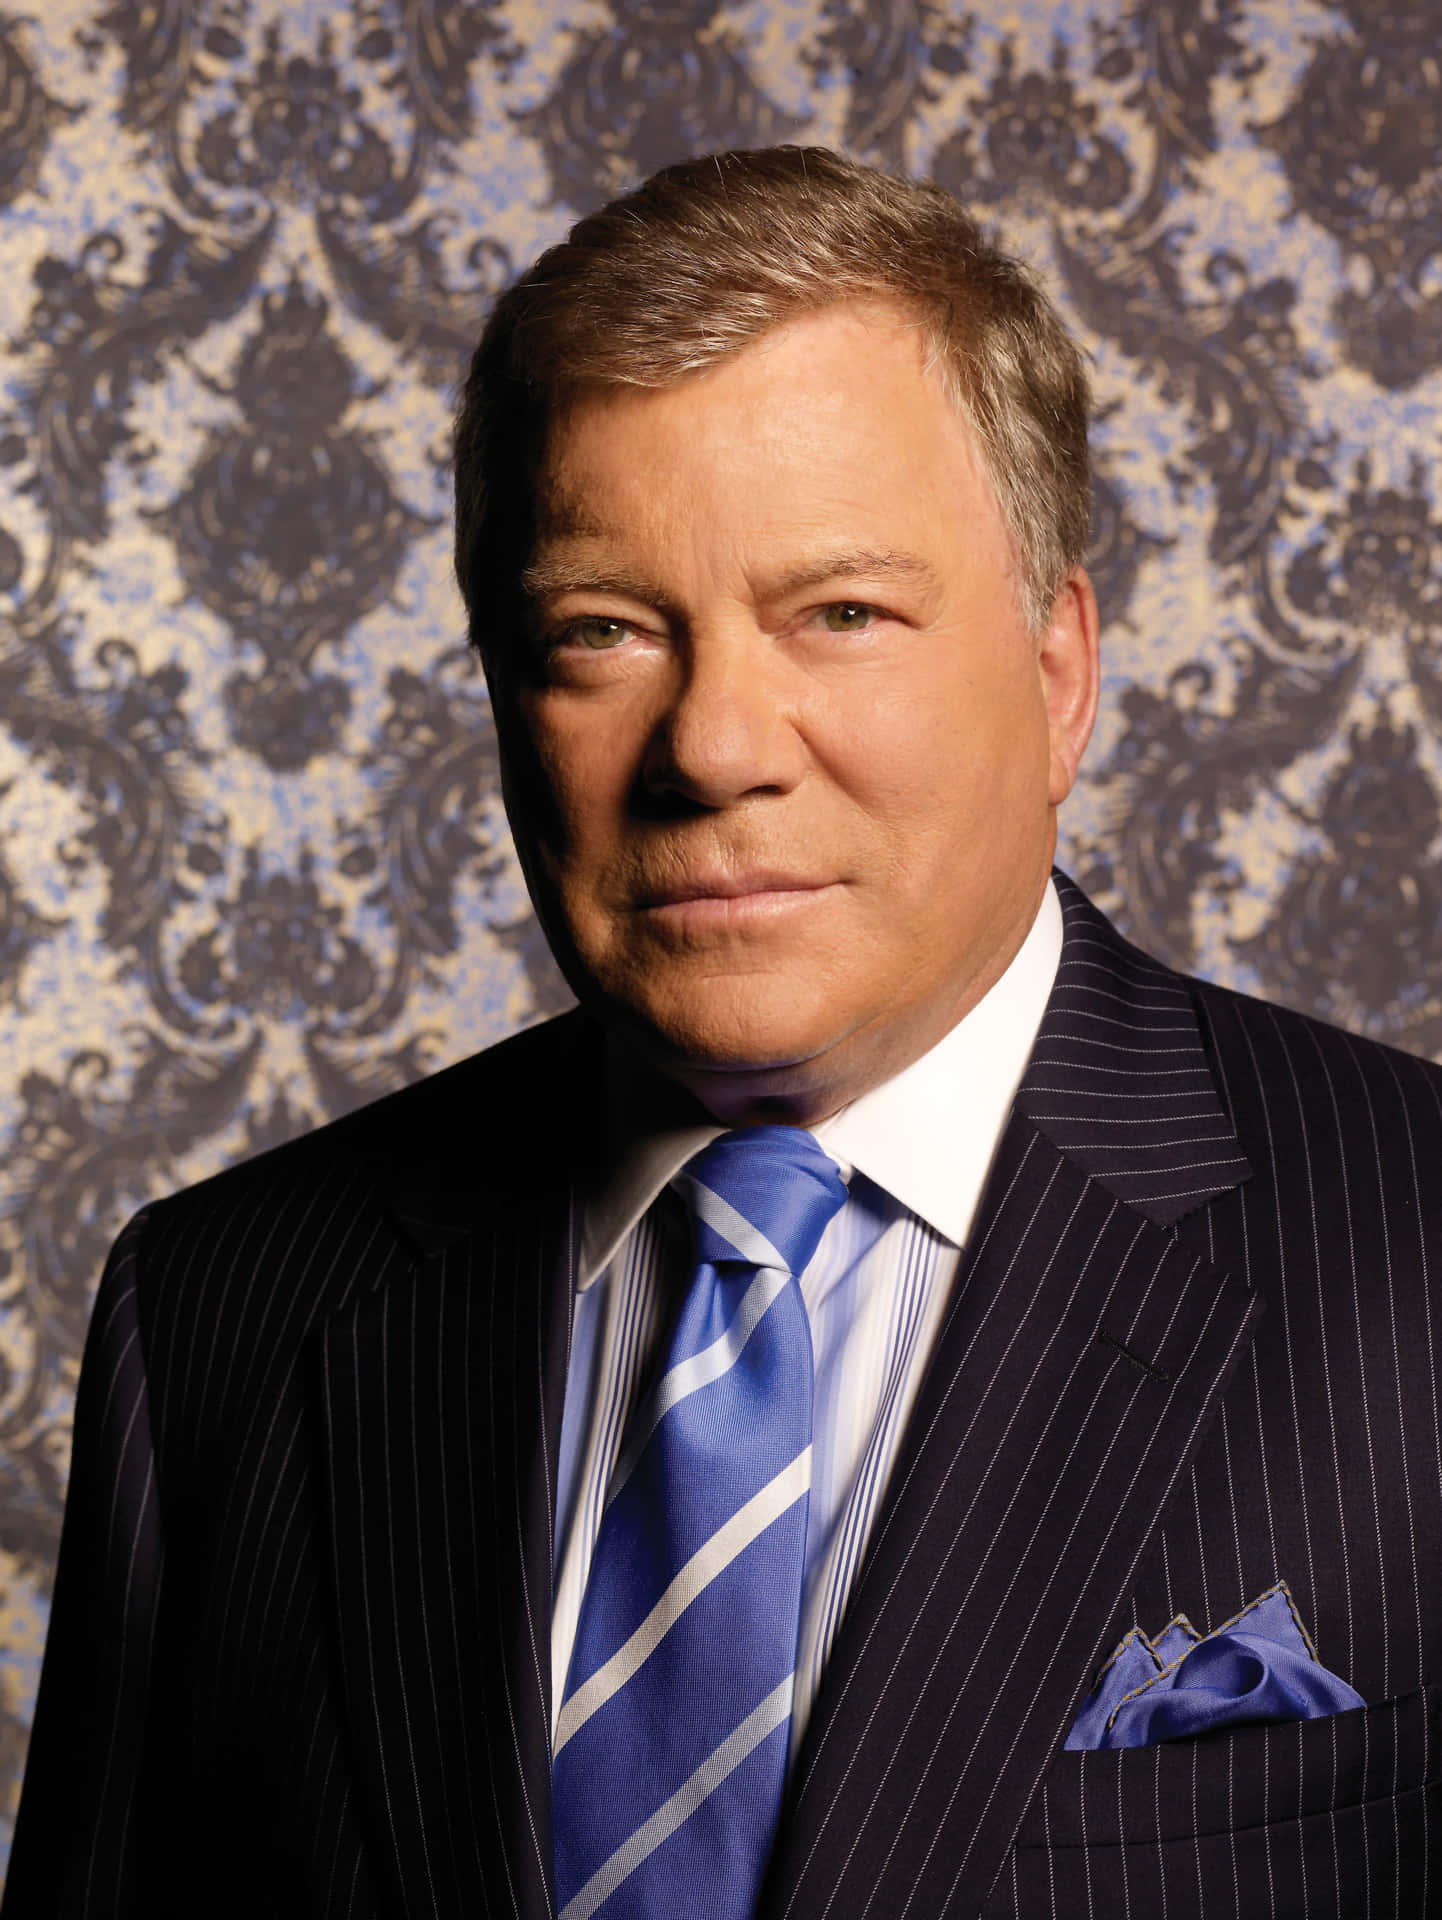 William Shatner Poses For A Professional Portrait Background